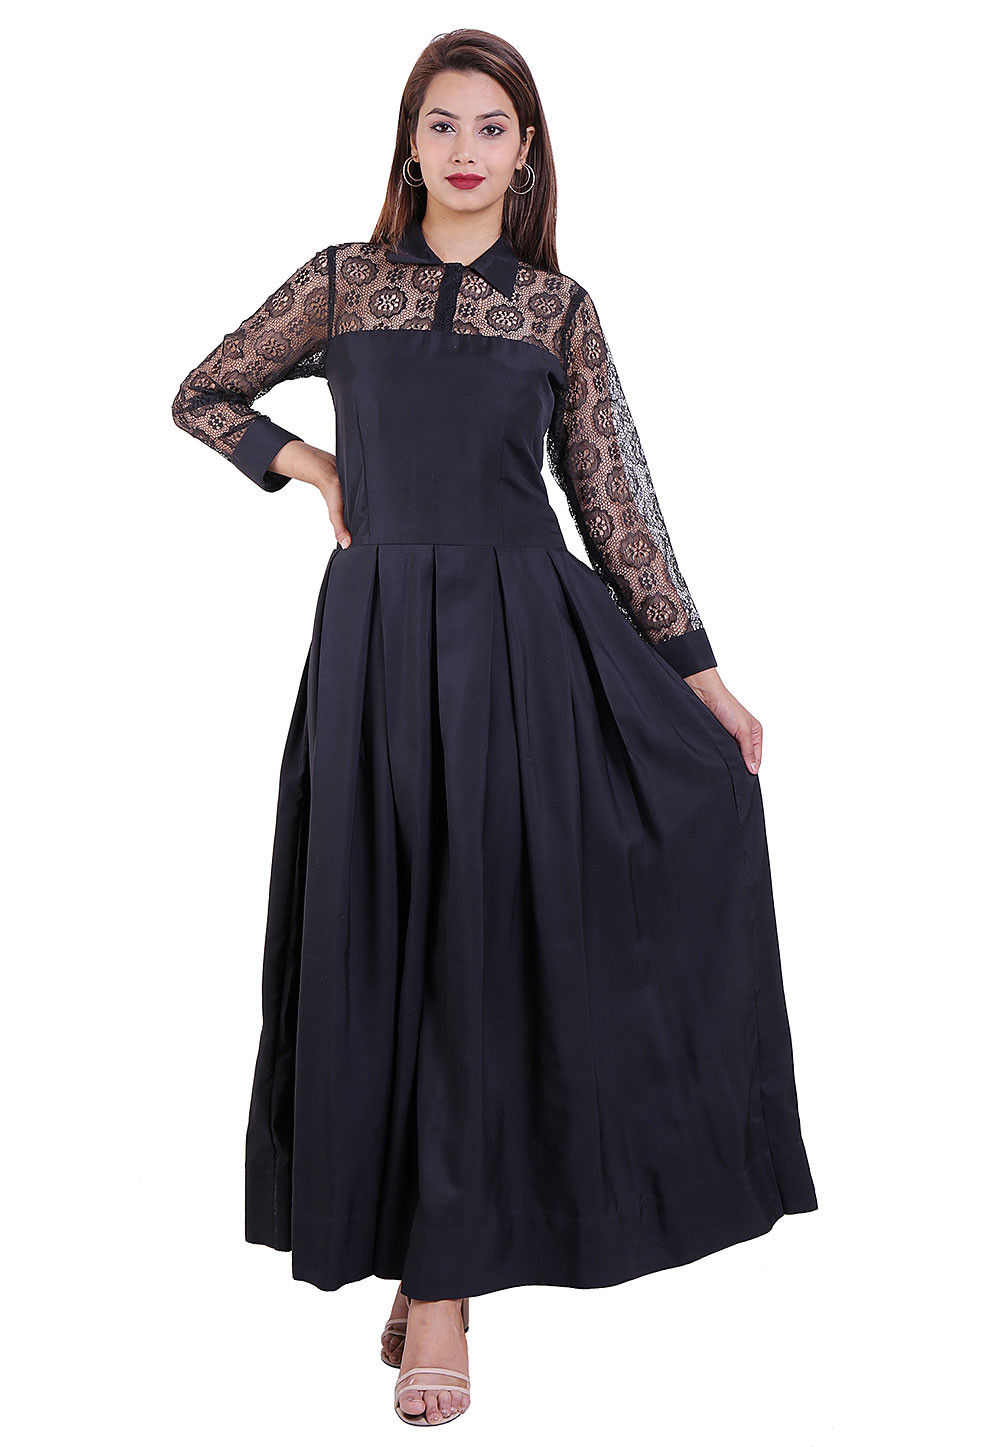 Woven Crepe Pleated Dress in Black ...